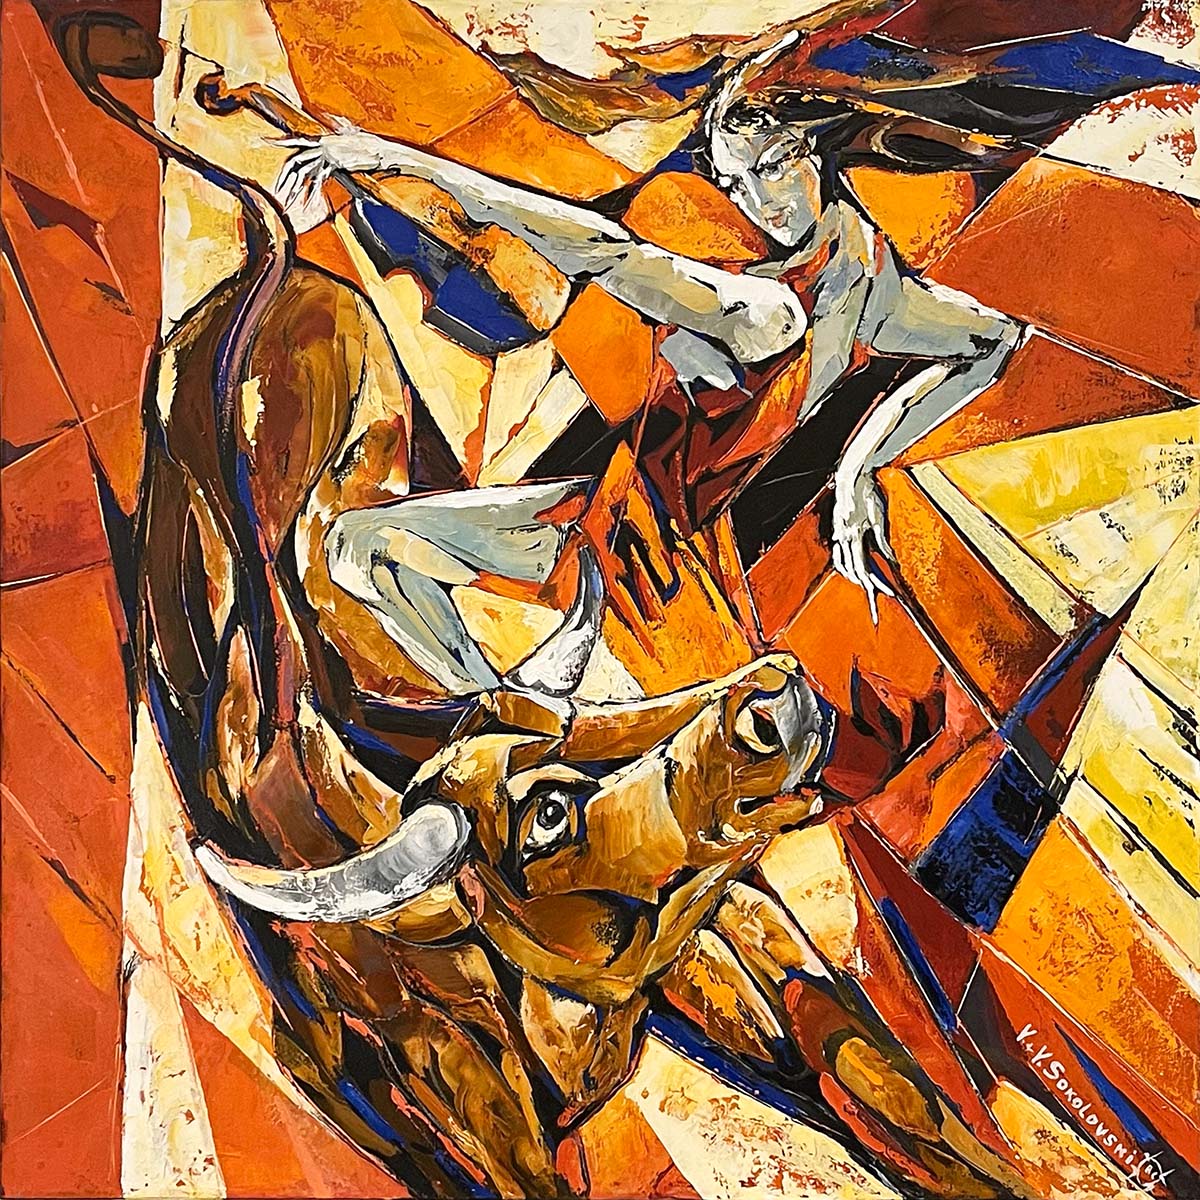 Contemporary art. Title: Dance with Me, Oil on Canvas, 36x36 in by Canadian artist Valeri Sokolovski.